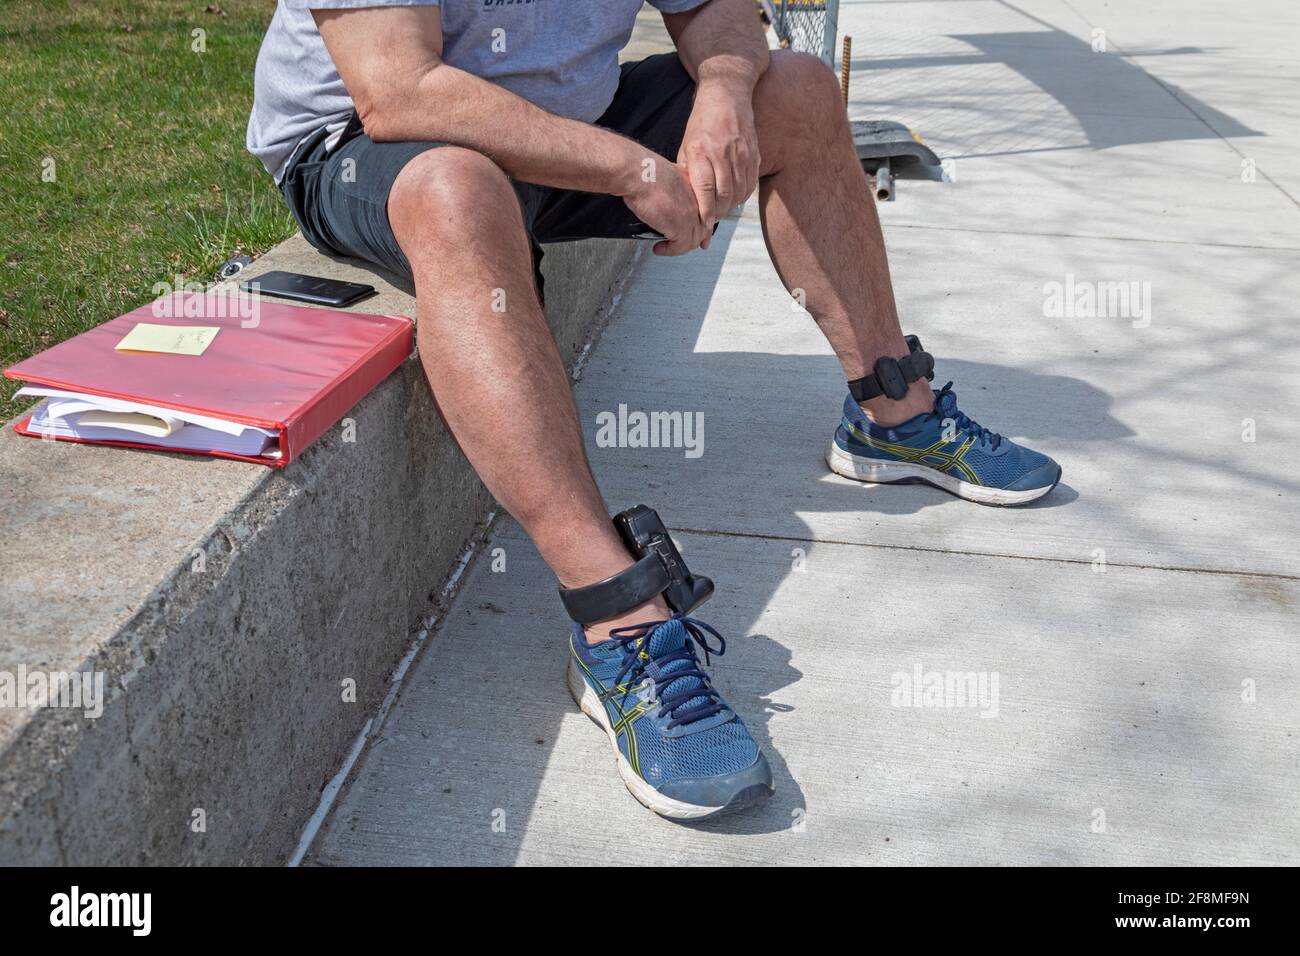 Detroit, Michigan - A man wears an electronic tether on each ankle. The devices report his location to criminal justice authorities. Stock Photo